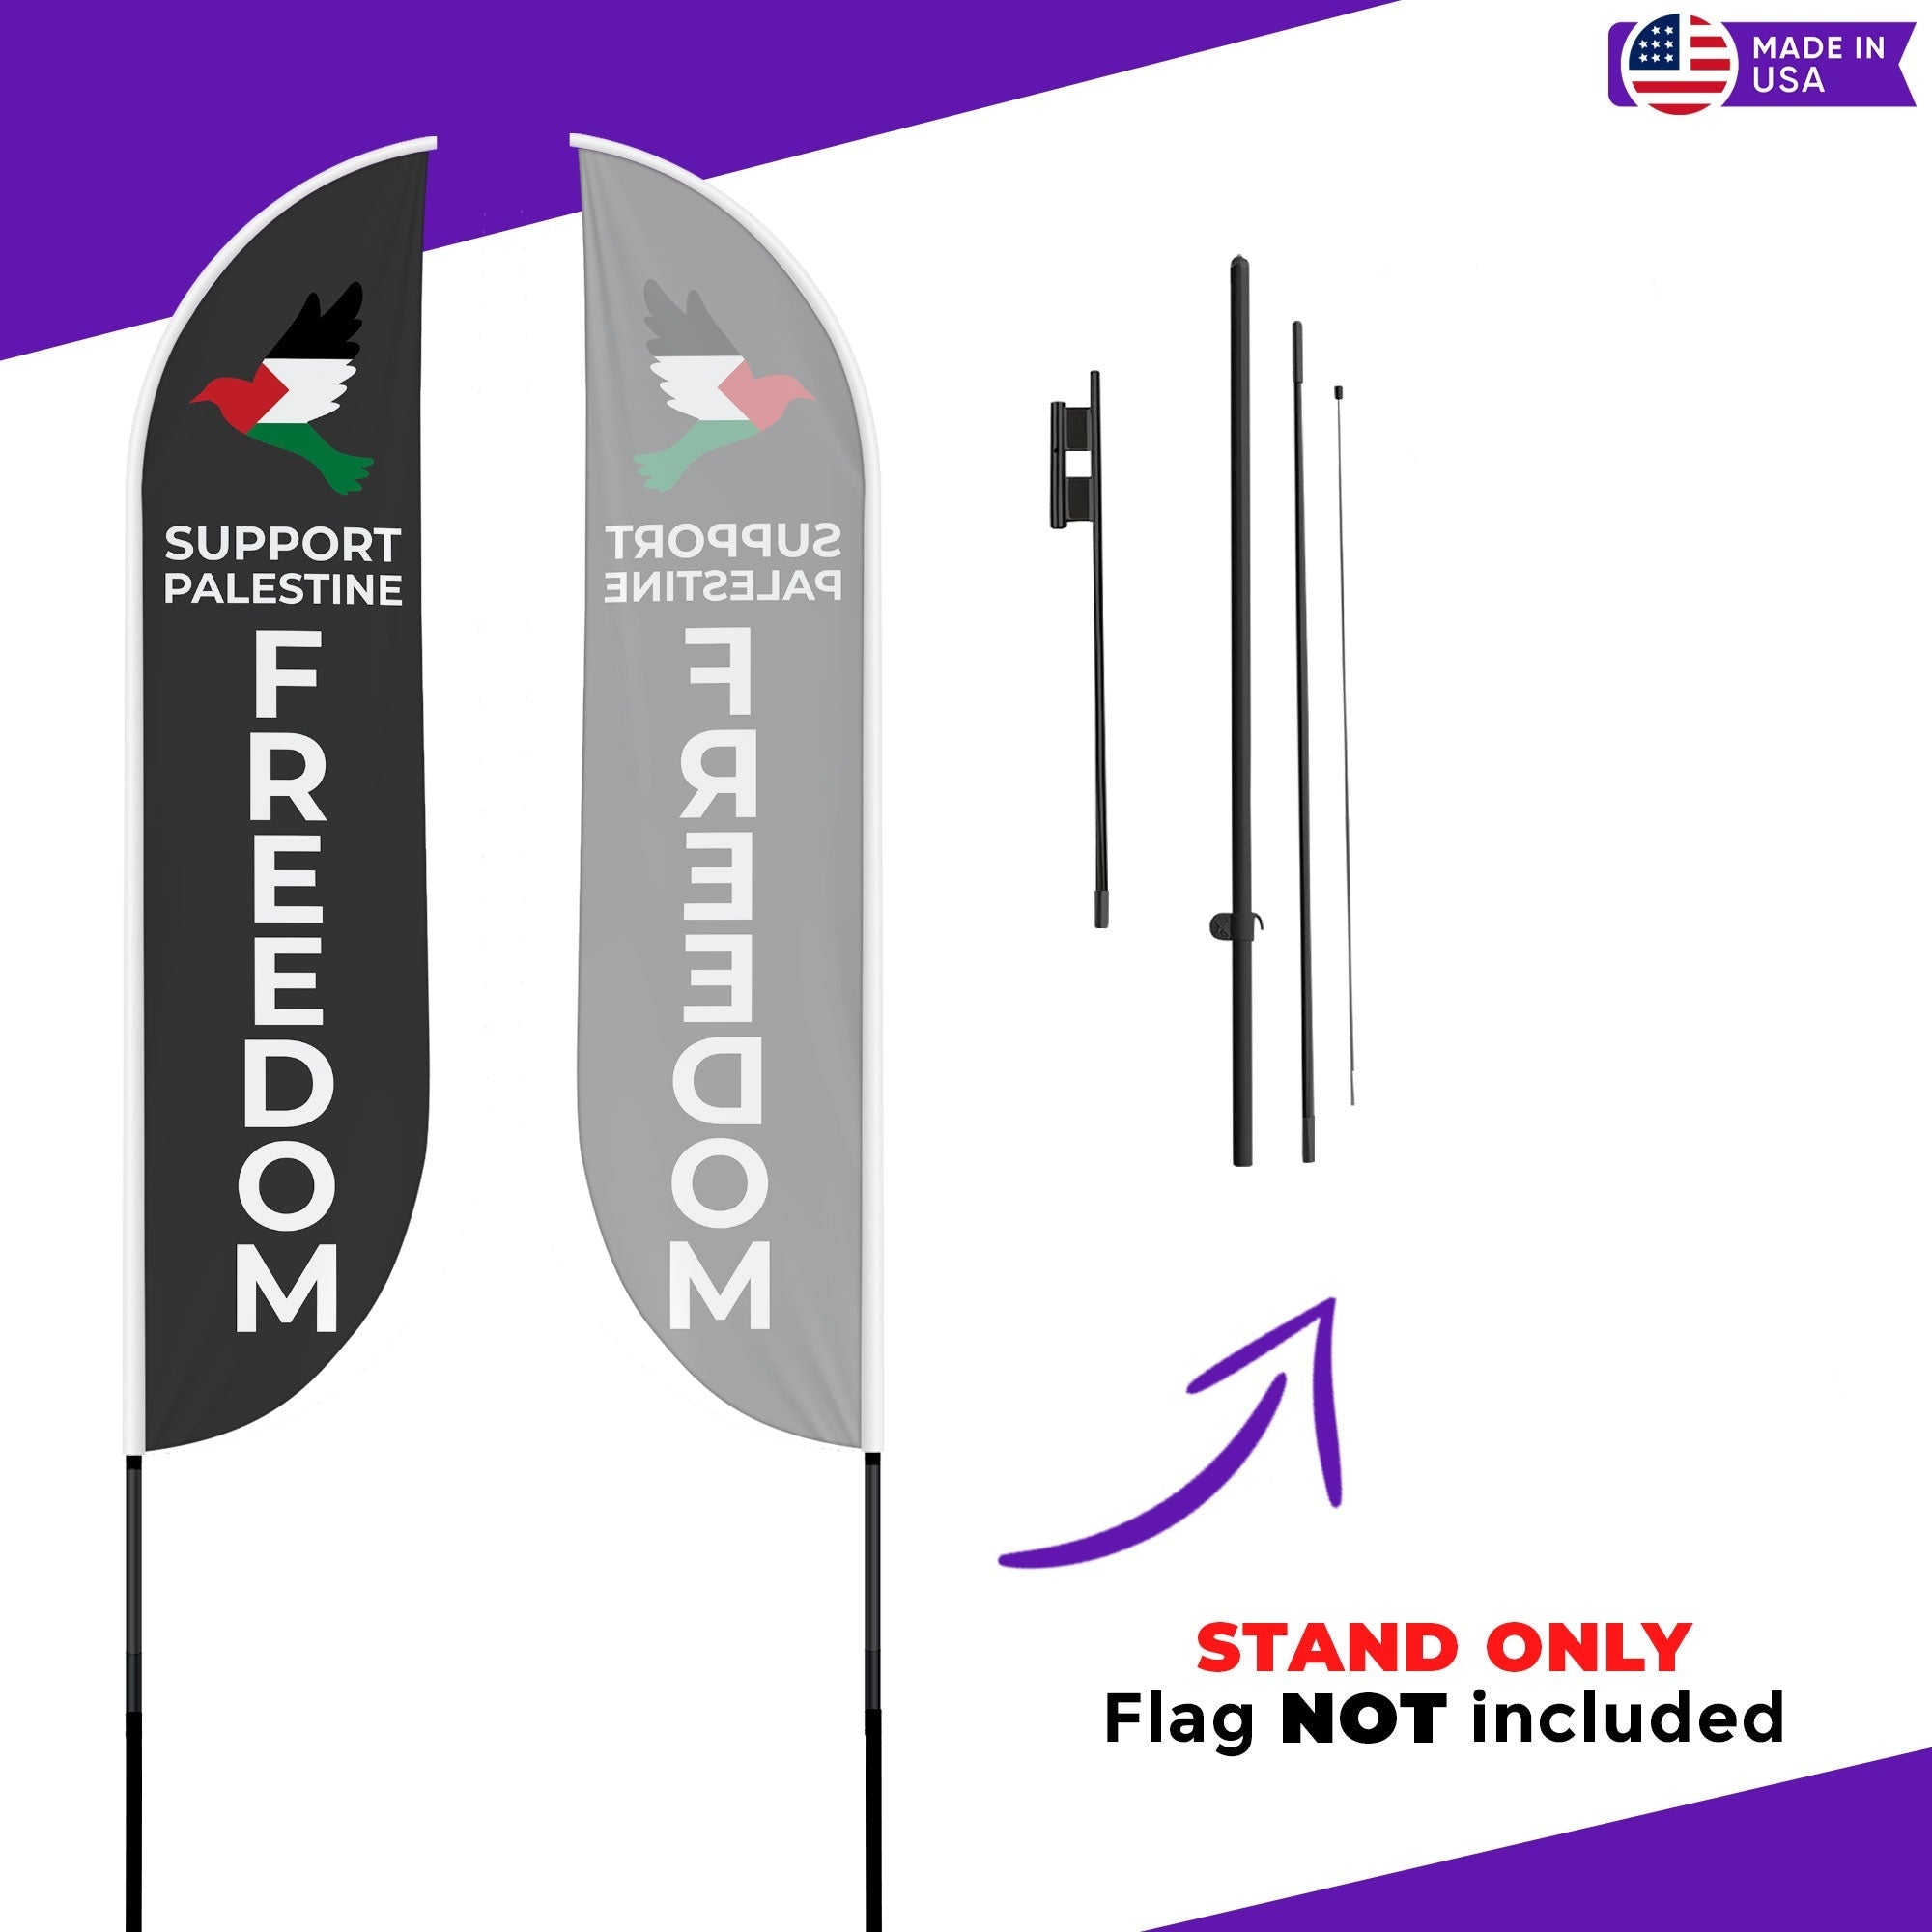 Palestine's Freedom Feather Flag